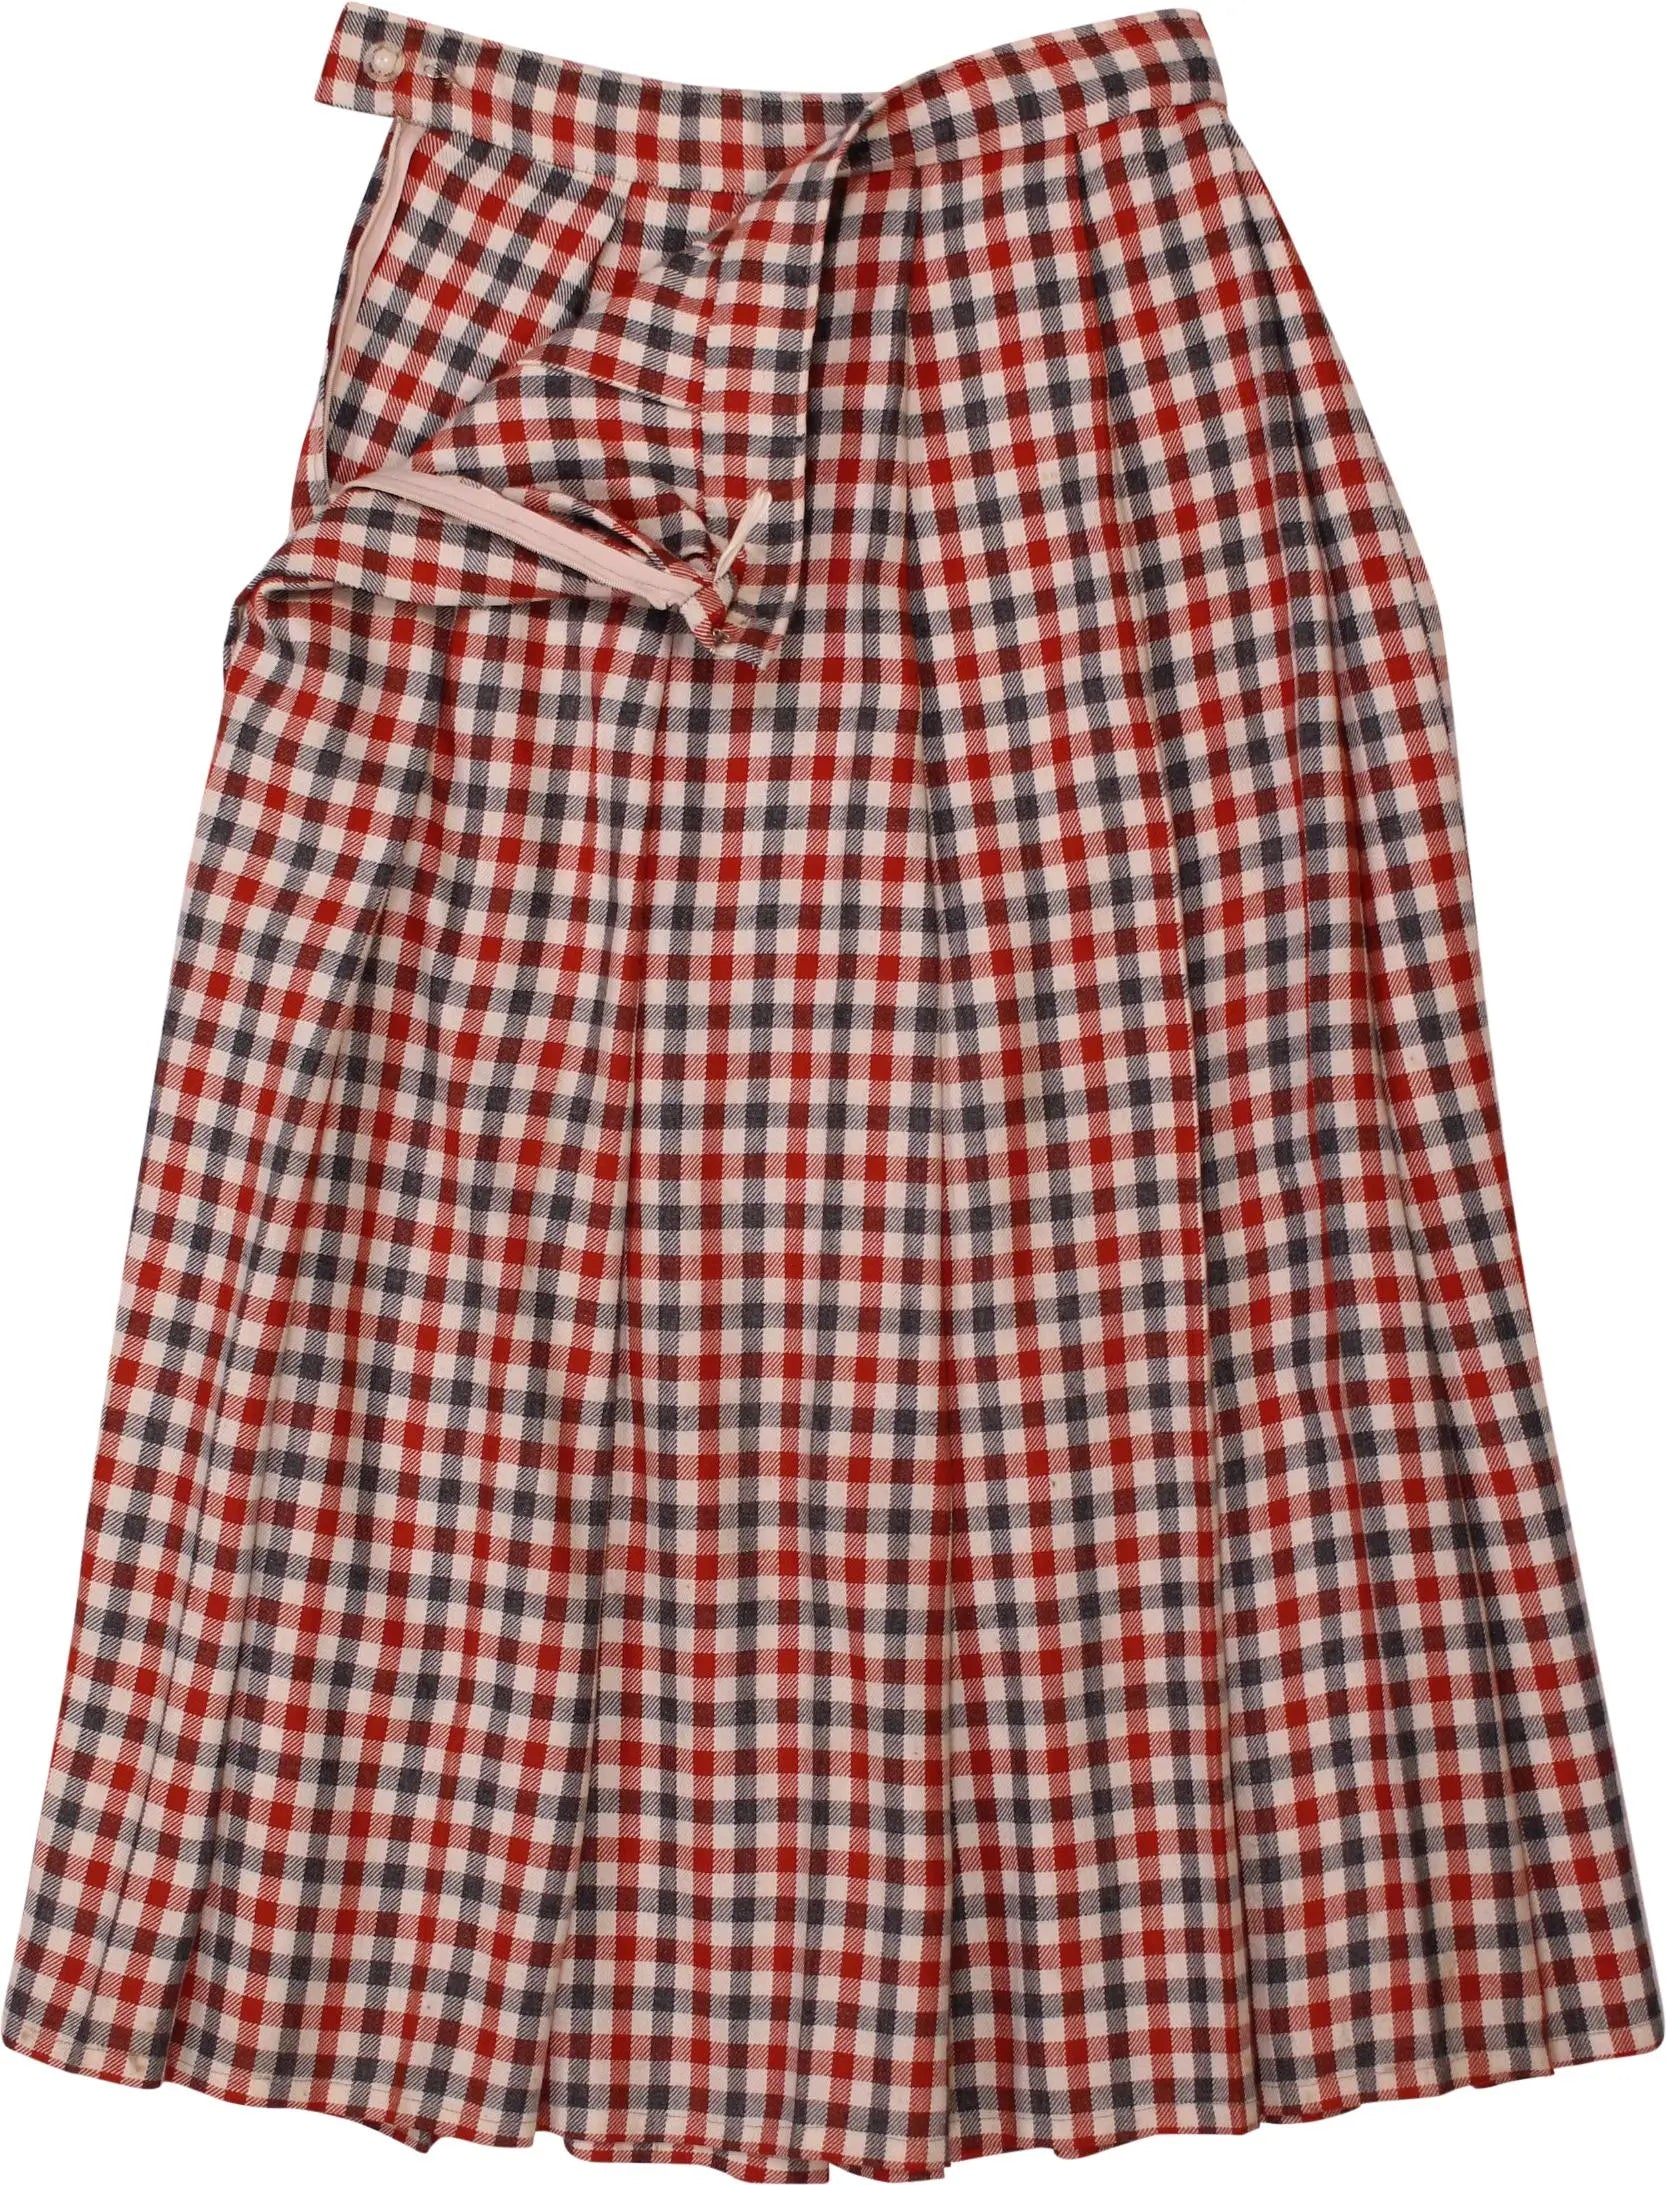 Unknown - Checked Skirt- ThriftTale.com - Vintage and second handclothing